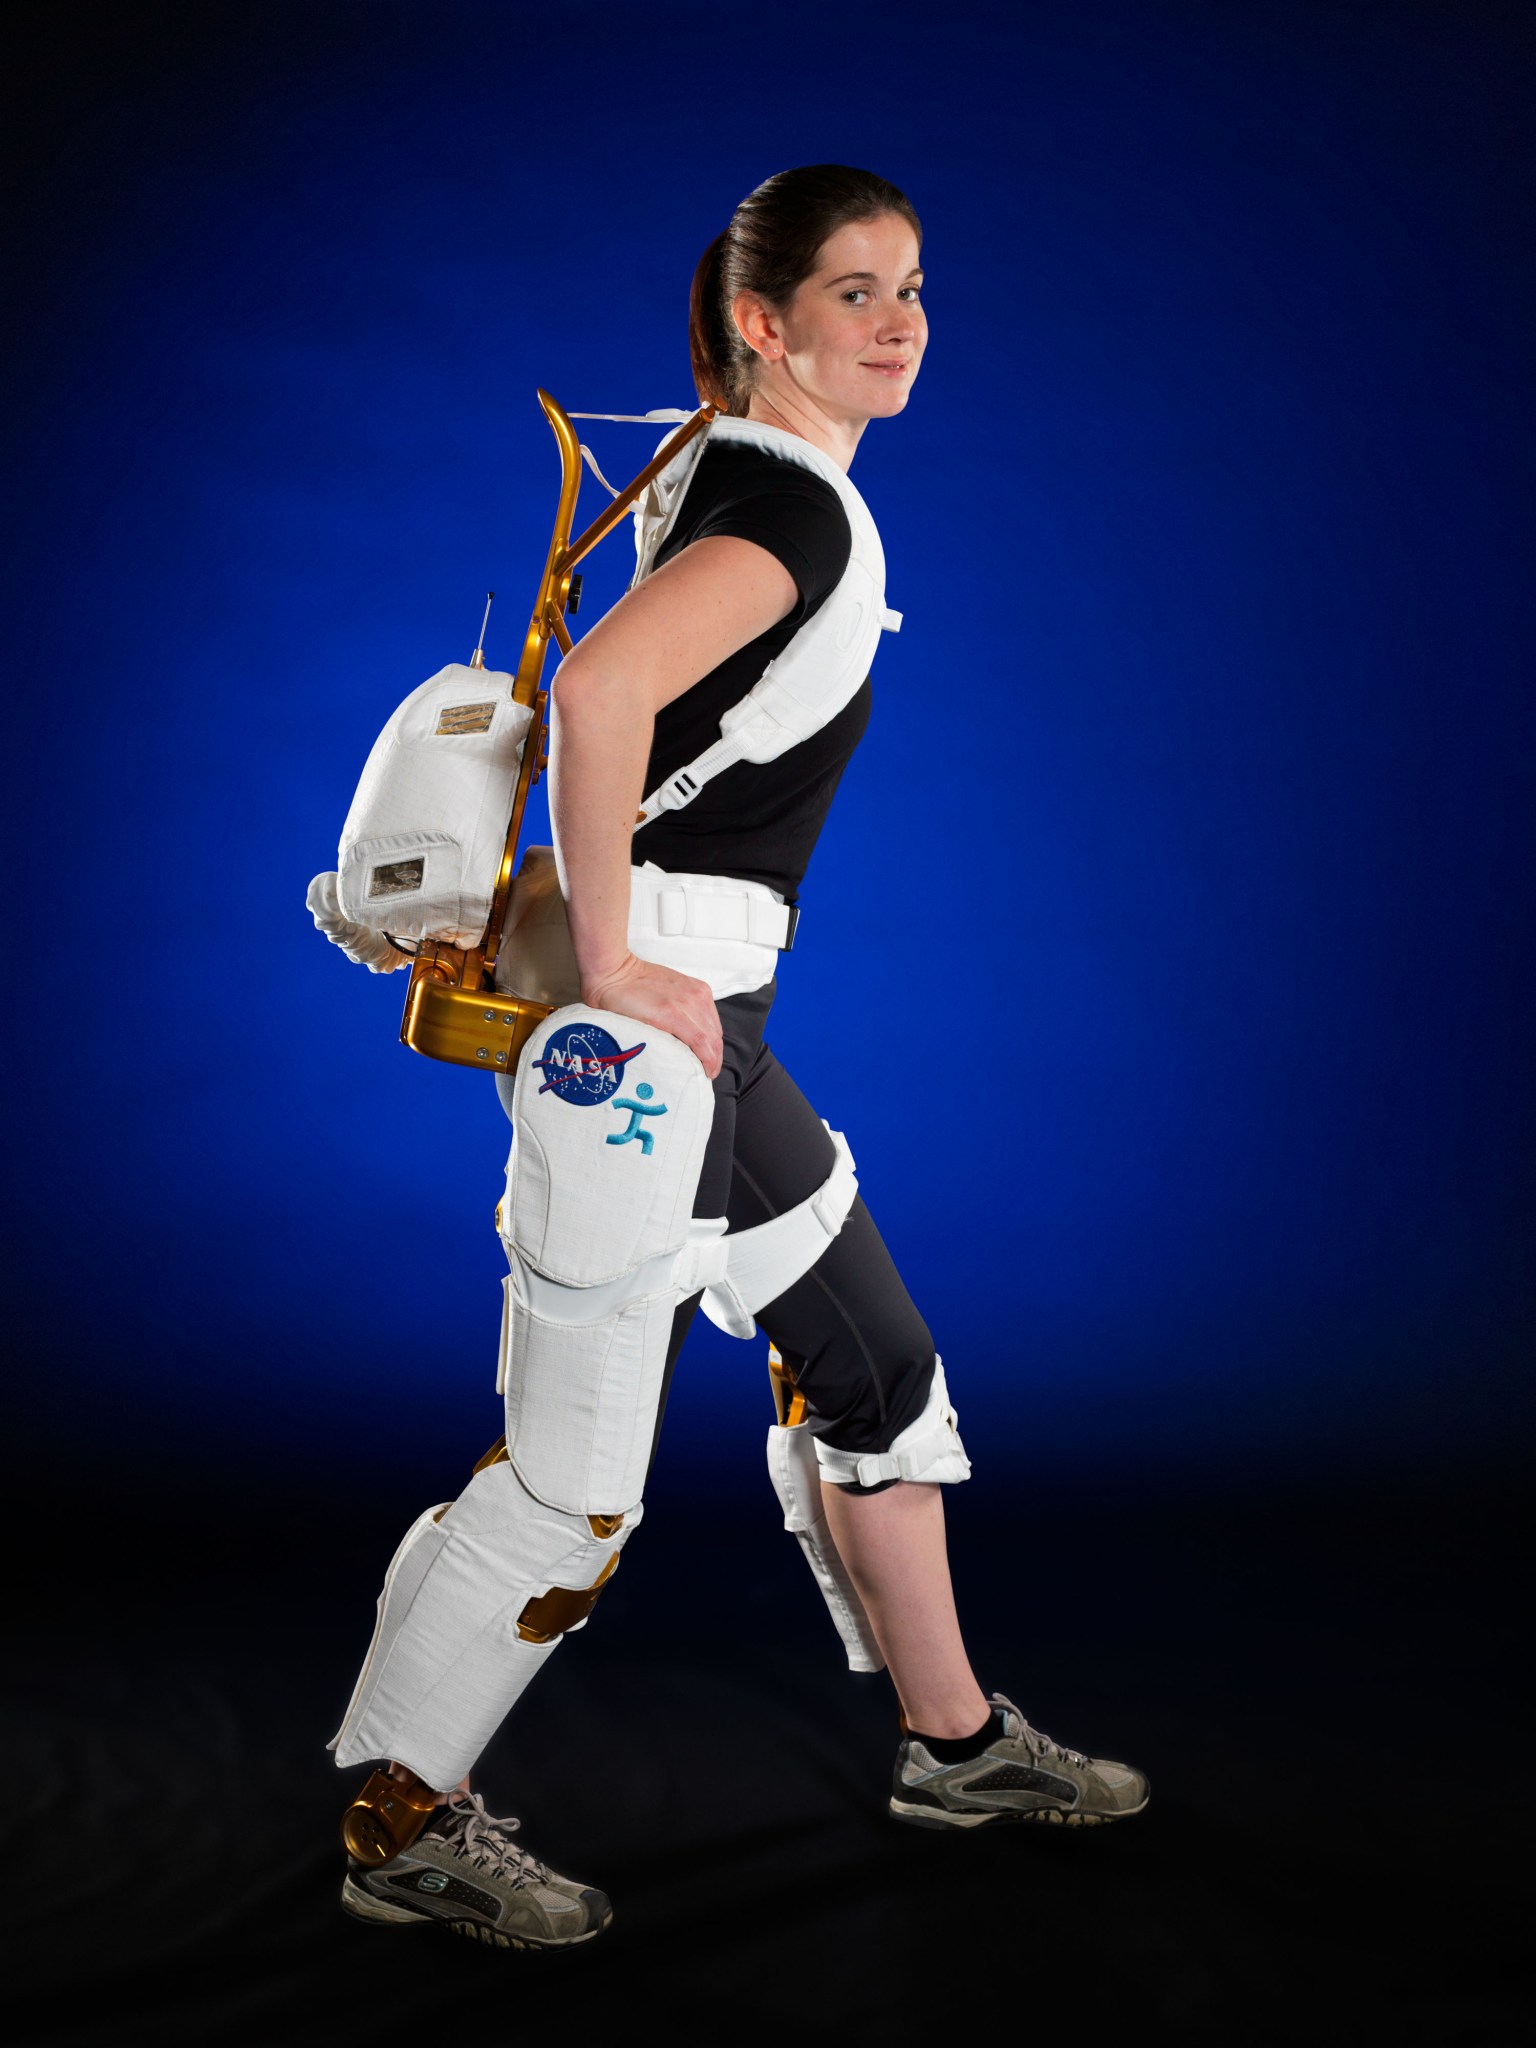 Project Engineer Shelley Rea demonstrates the  X1 Robotic Exoskeleton